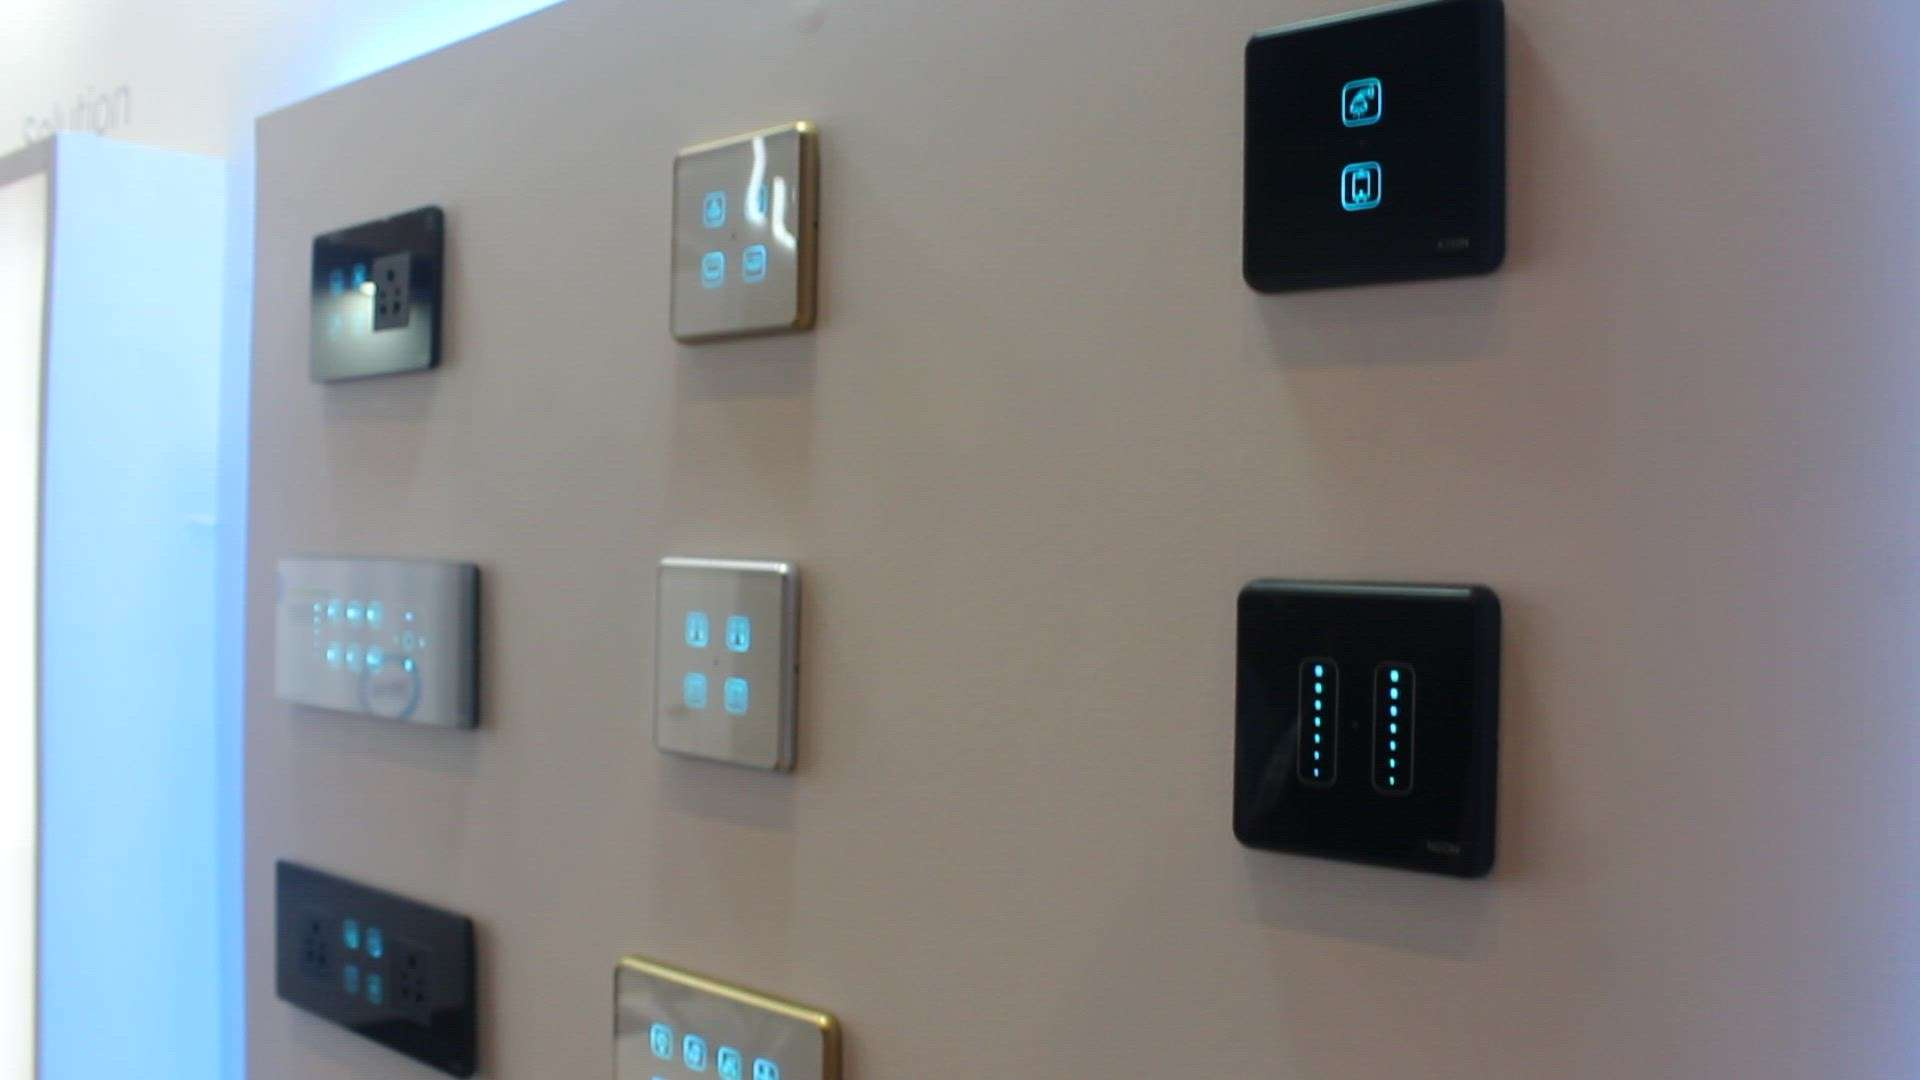 Smart Touch Panel Series  #smart_switches  #HomeAutomation #Architect